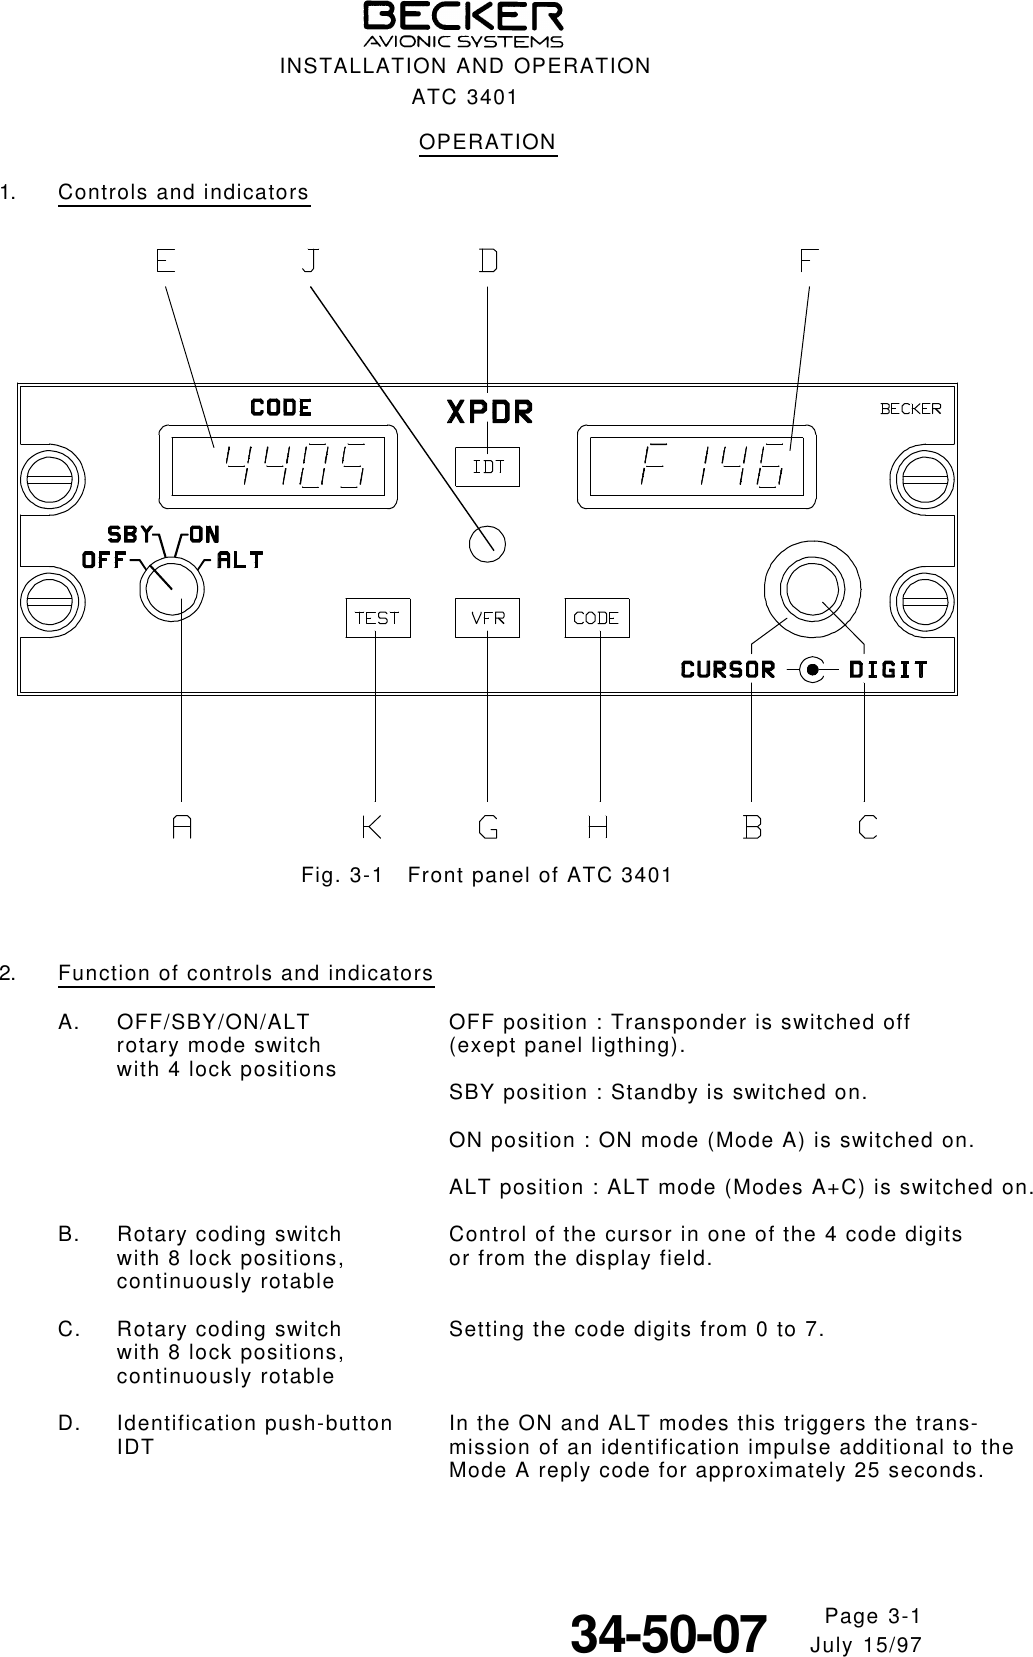 OPERATION1. Controls and indicatorsFig. 3-1   Front panel of ATC 34012. Function of controls and indicatorsA. OFF/SBY/ON/ALT OFF position : Transponder is switched offrotary mode switch (exept panel ligthing).with 4 lock positions SBY position : Standby is switched on.ON position : ON mode (Mode A) is switched on.ALT position : ALT mode (Modes A+C) is switched on.B. Rotary coding switch Control of the cursor in one of the 4 code digitswith 8 lock positions, or from the display field.continuously rotableC. Rotary coding switch Setting the code digits from 0 to 7.with 8 lock positions,continuously rotableD. Identification push-button In the ON and ALT modes this triggers the trans-IDT mission of an identification impulse additional to theMode A reply code for approximately 25 seconds.INSTALLATION AND OPERATIONATC 3401Page 3-134-50-07     July 15/97